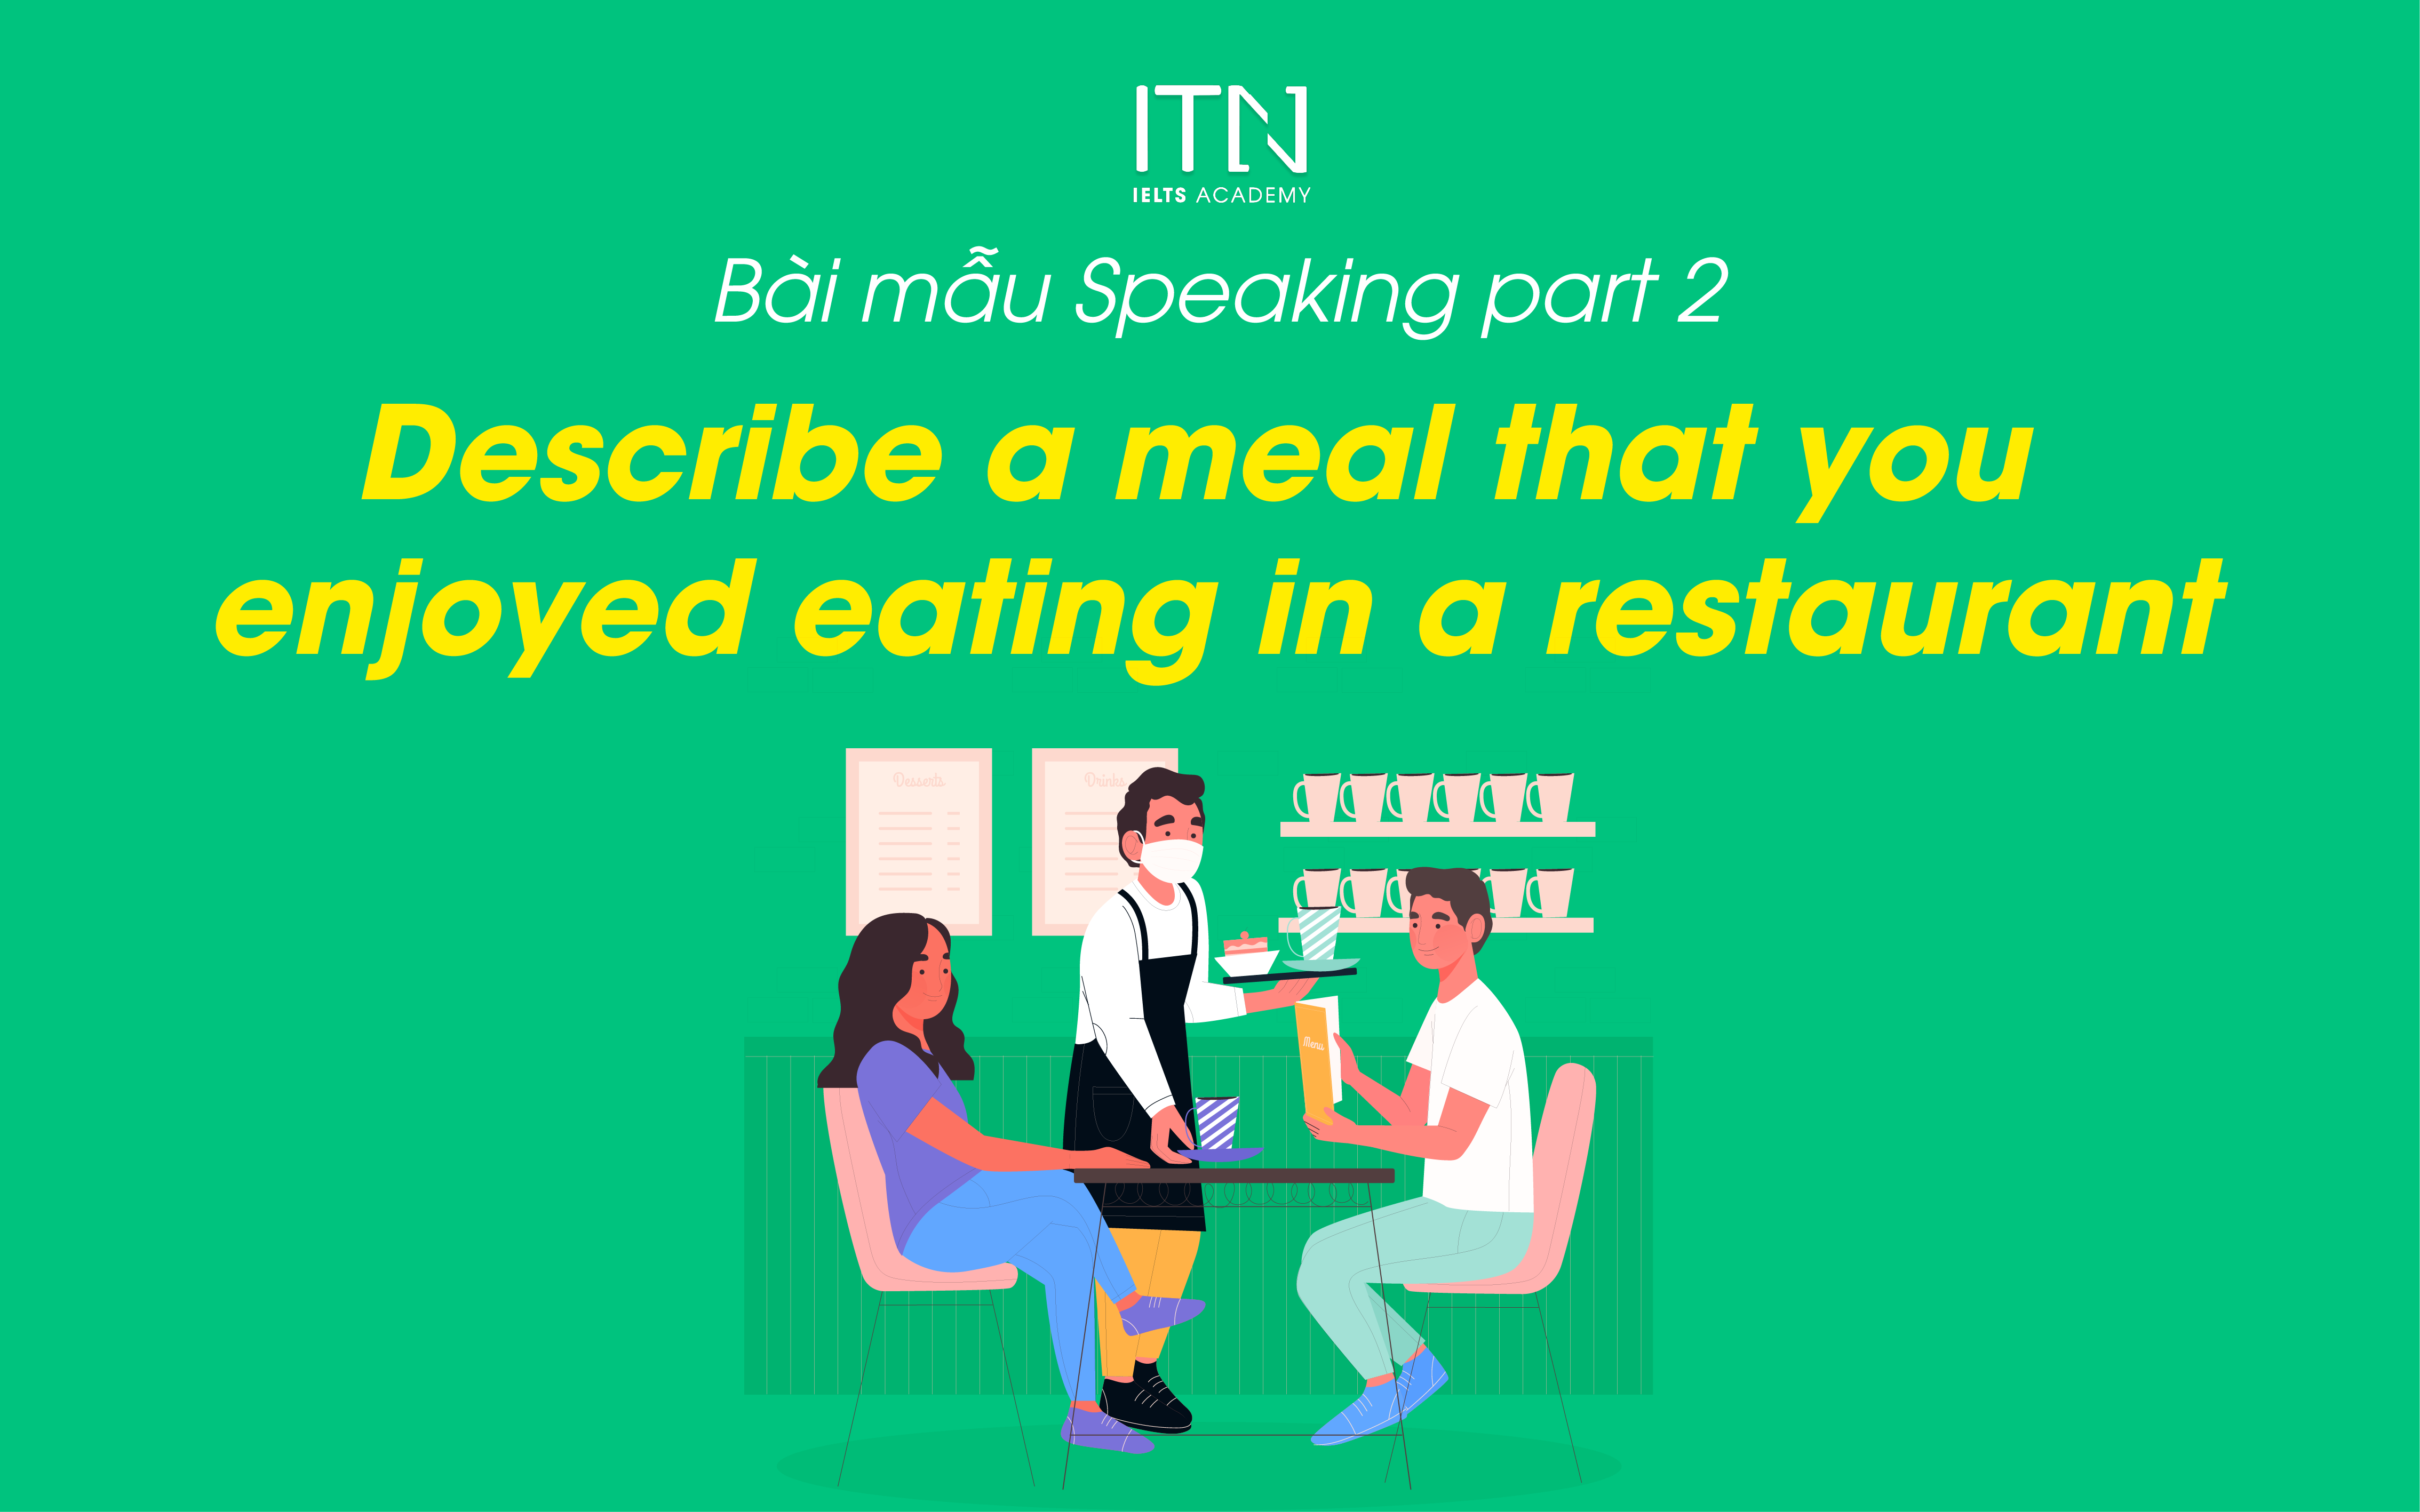 Describe A Meal That You Enjoyed Eating In A Restaurant - Bài Mẫu Speaking Part 2 